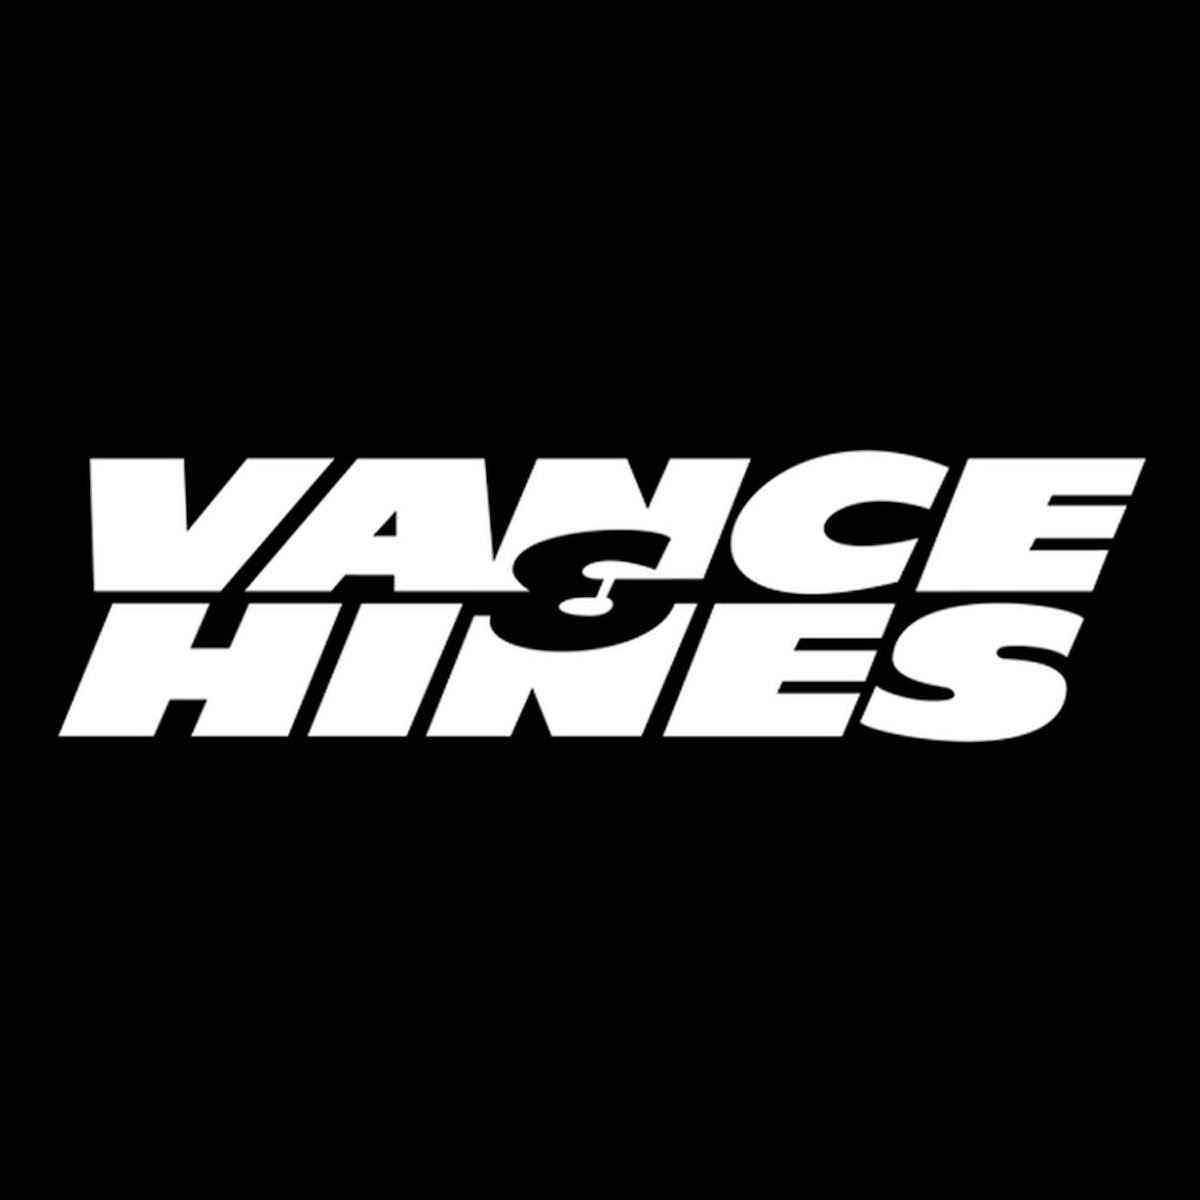 A view of the Vance & Hines logo